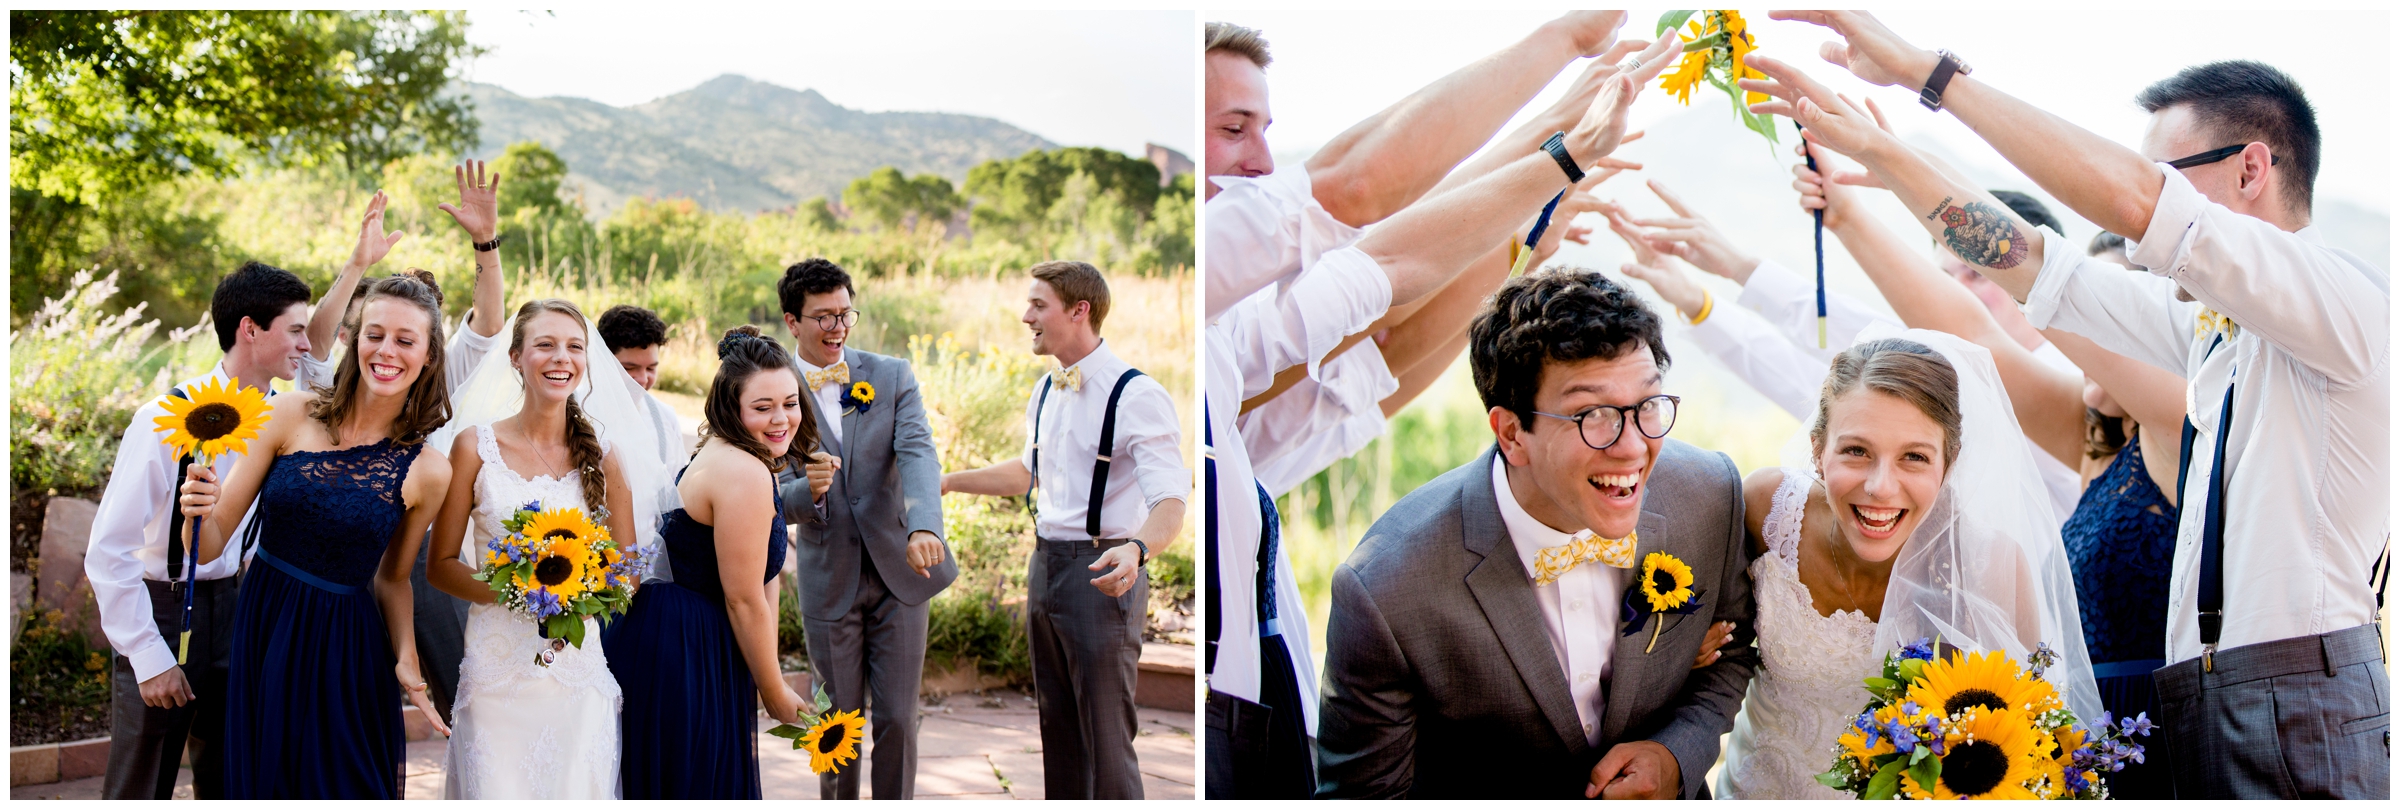 gray and yellow wedding party portraits at Red Rocks Chapel Colorado wedding 